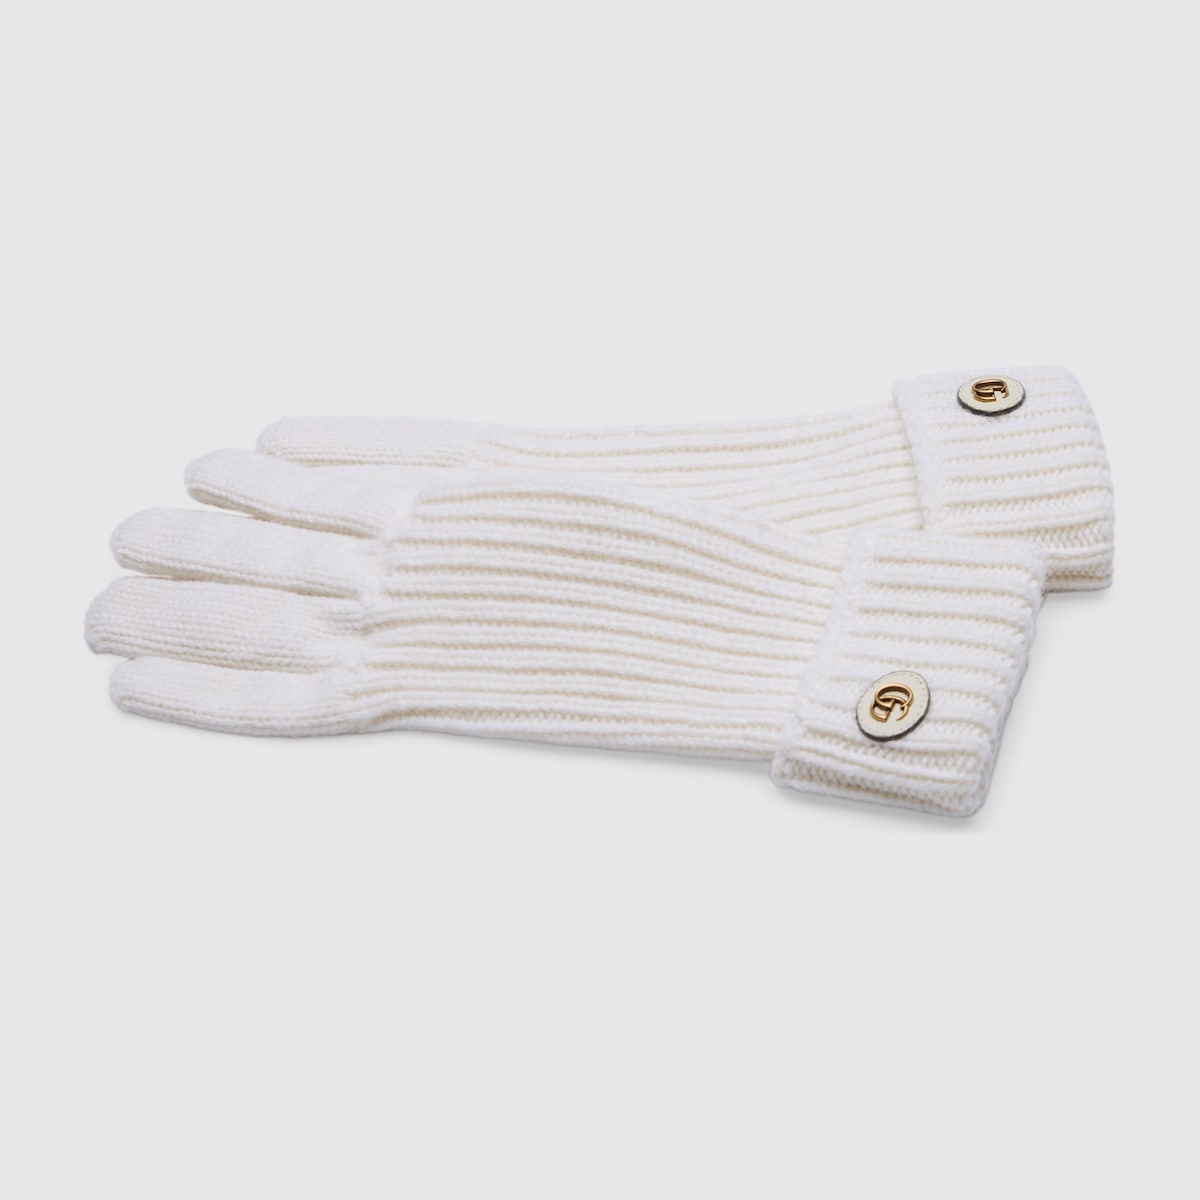 Wool cashmere gloves with Double G - 2